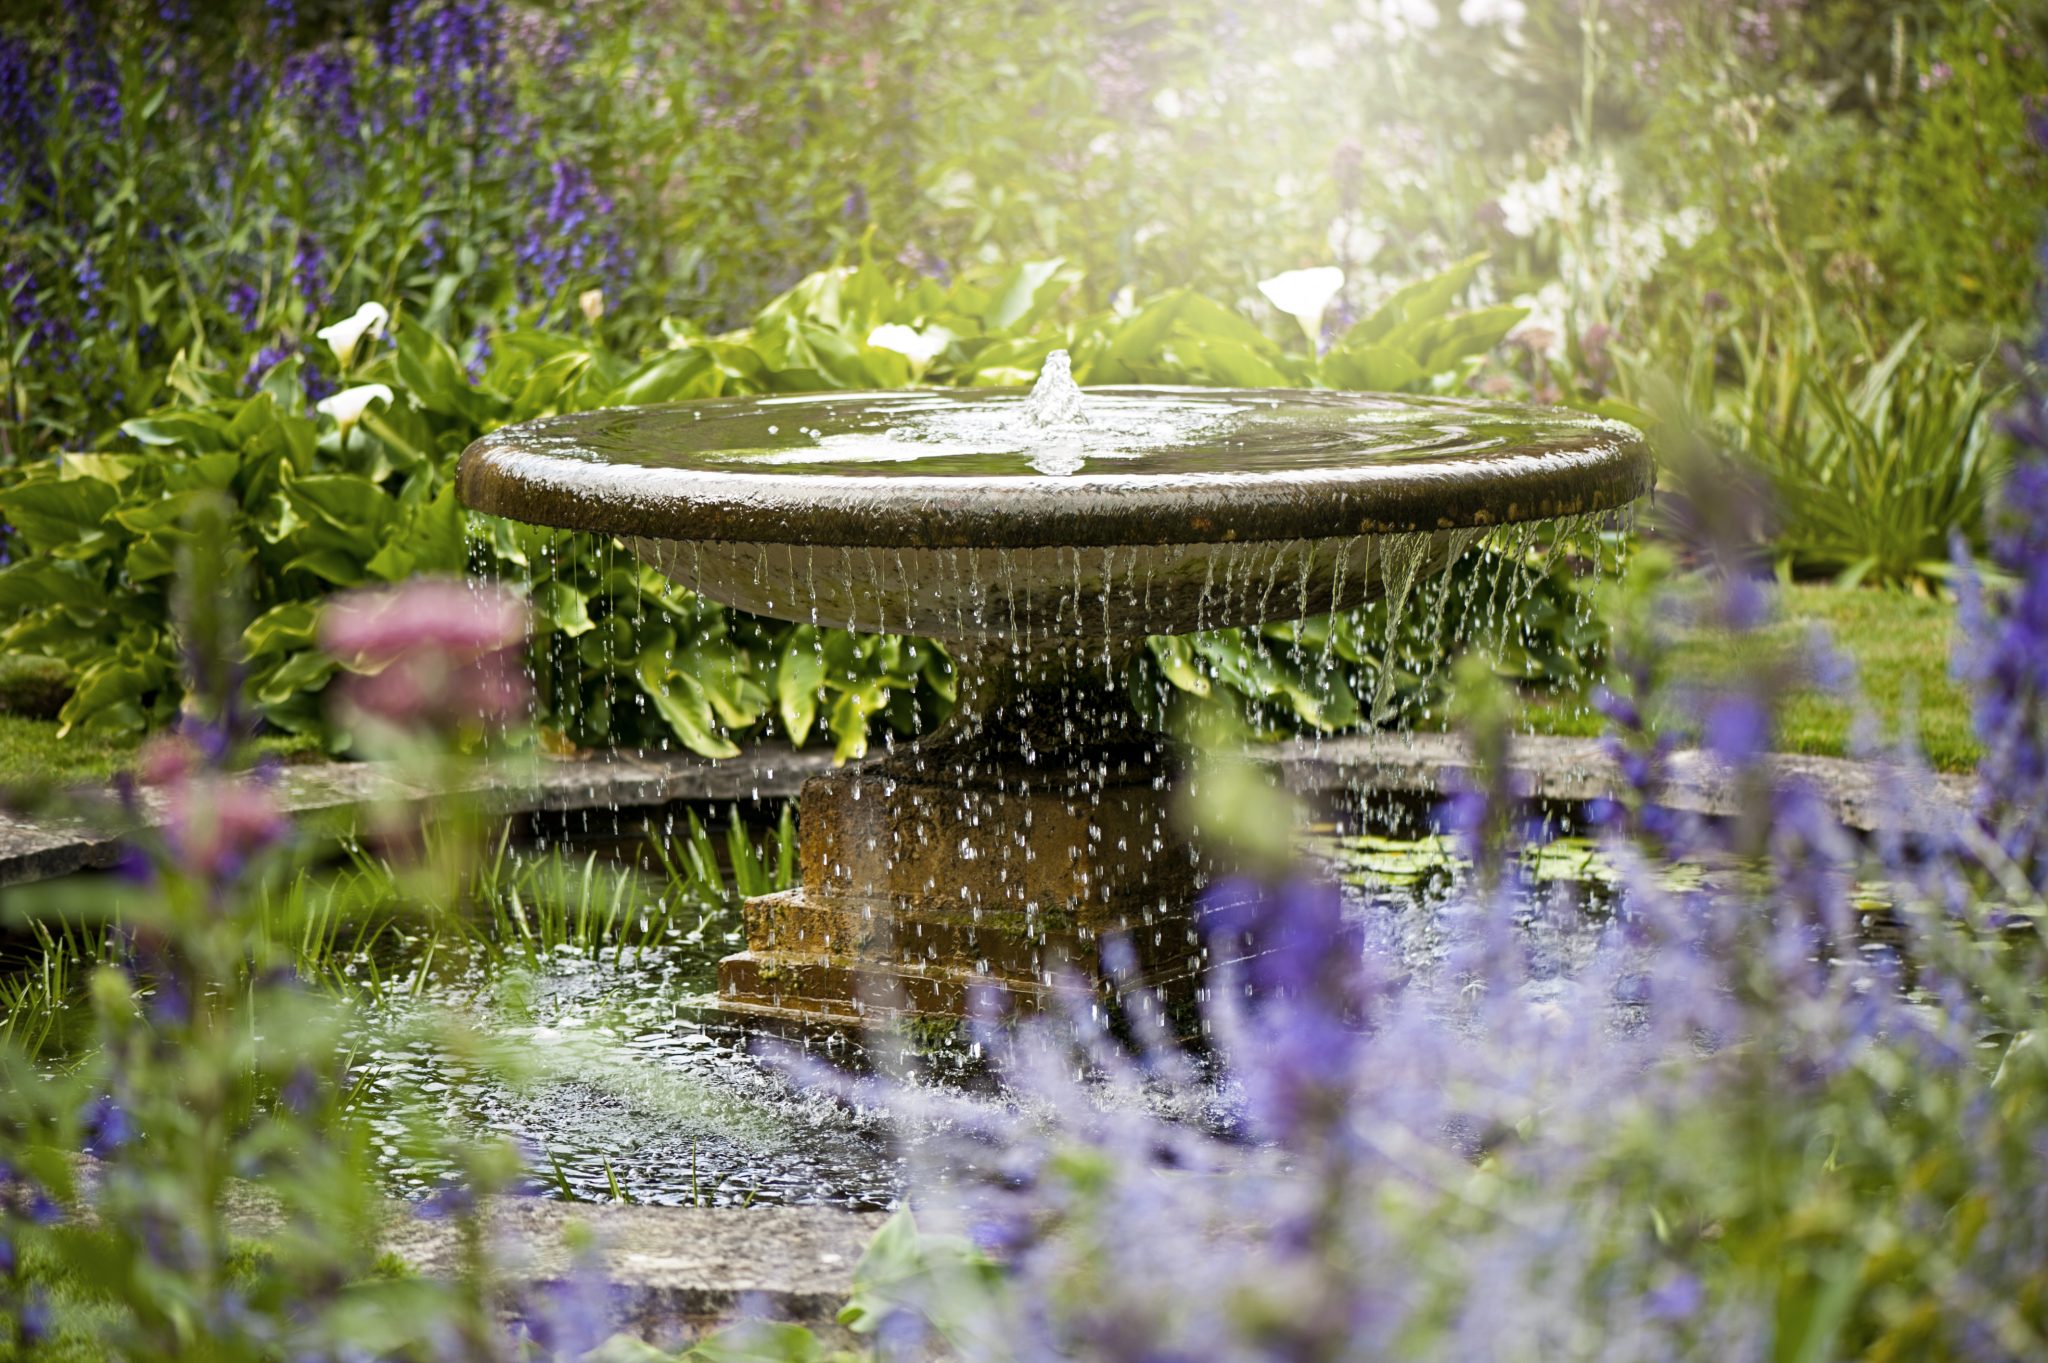 Fountain in garden pool surrounded by flowers